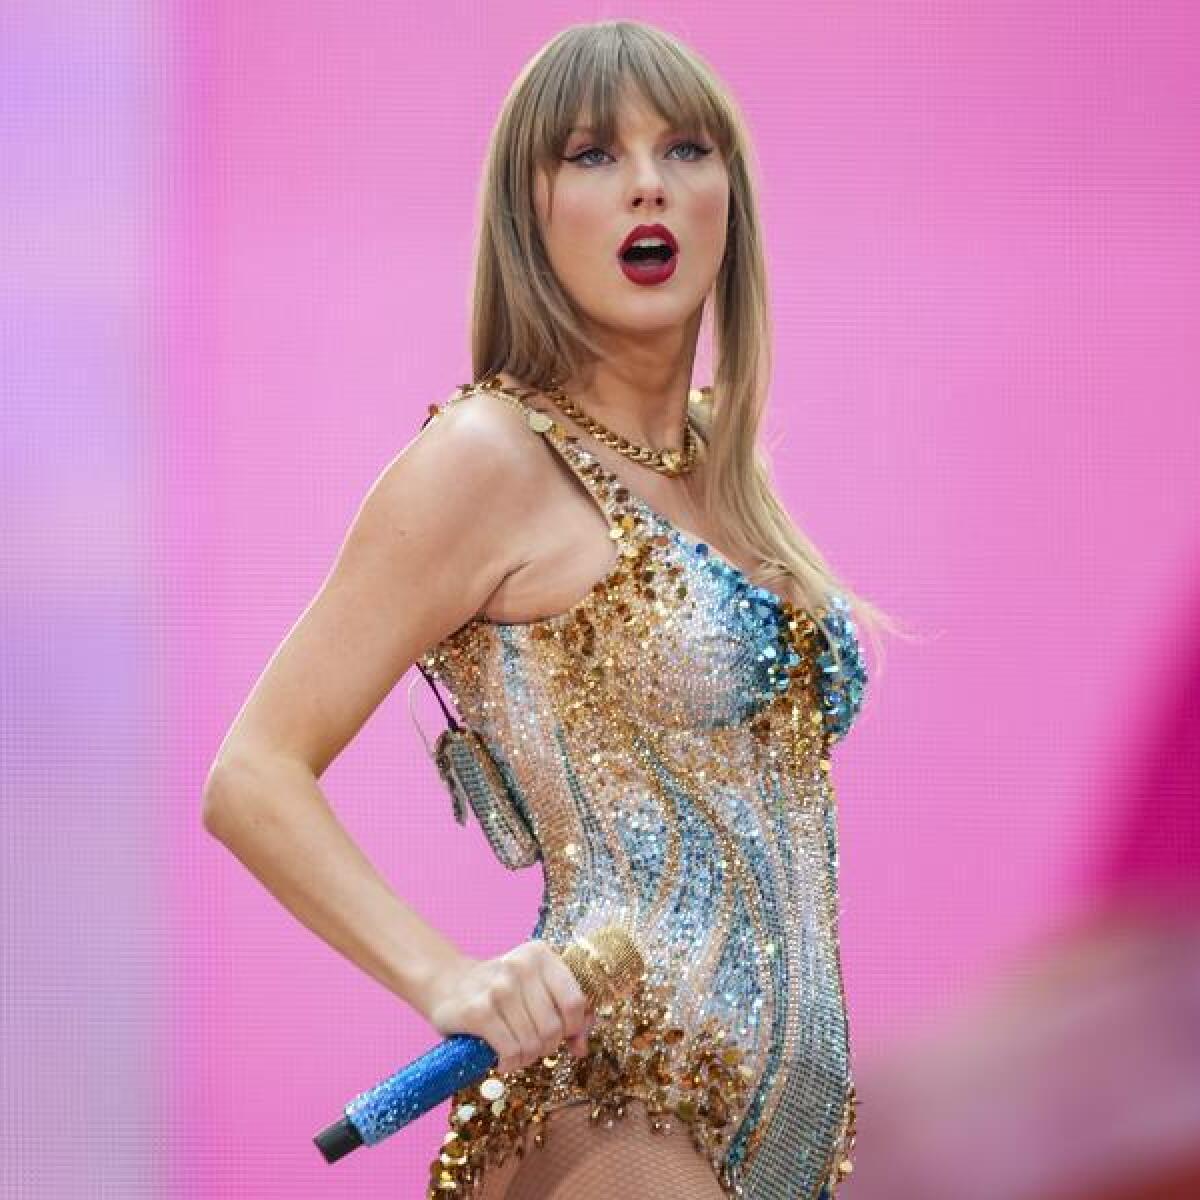 Taylor Swift performs at Wembley Stadium in London